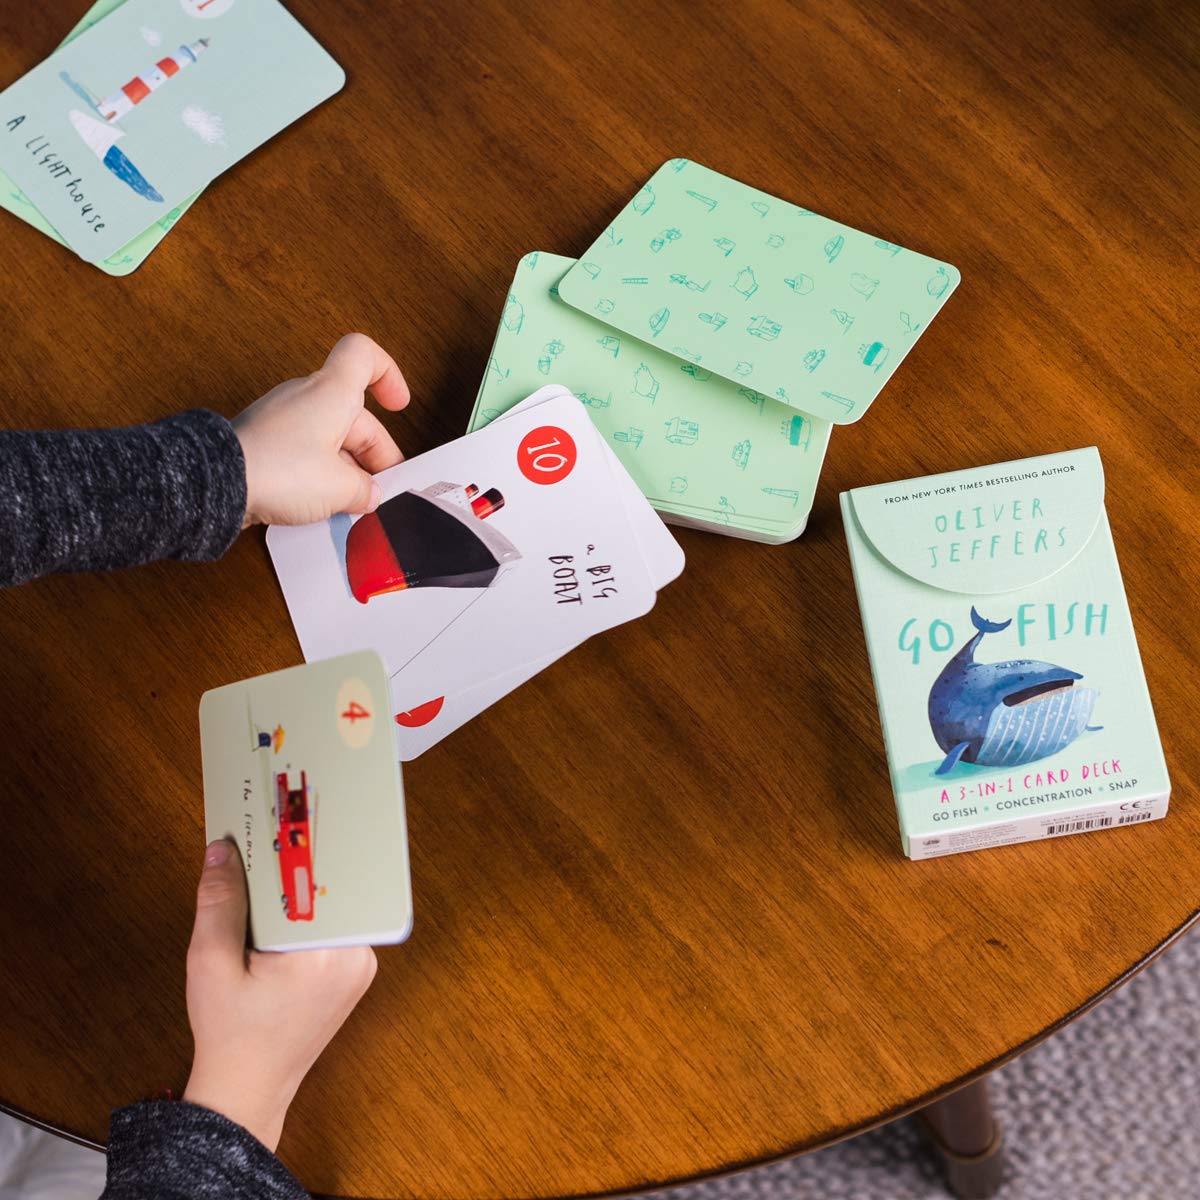 Go Fish 3-in-1 Card Deck